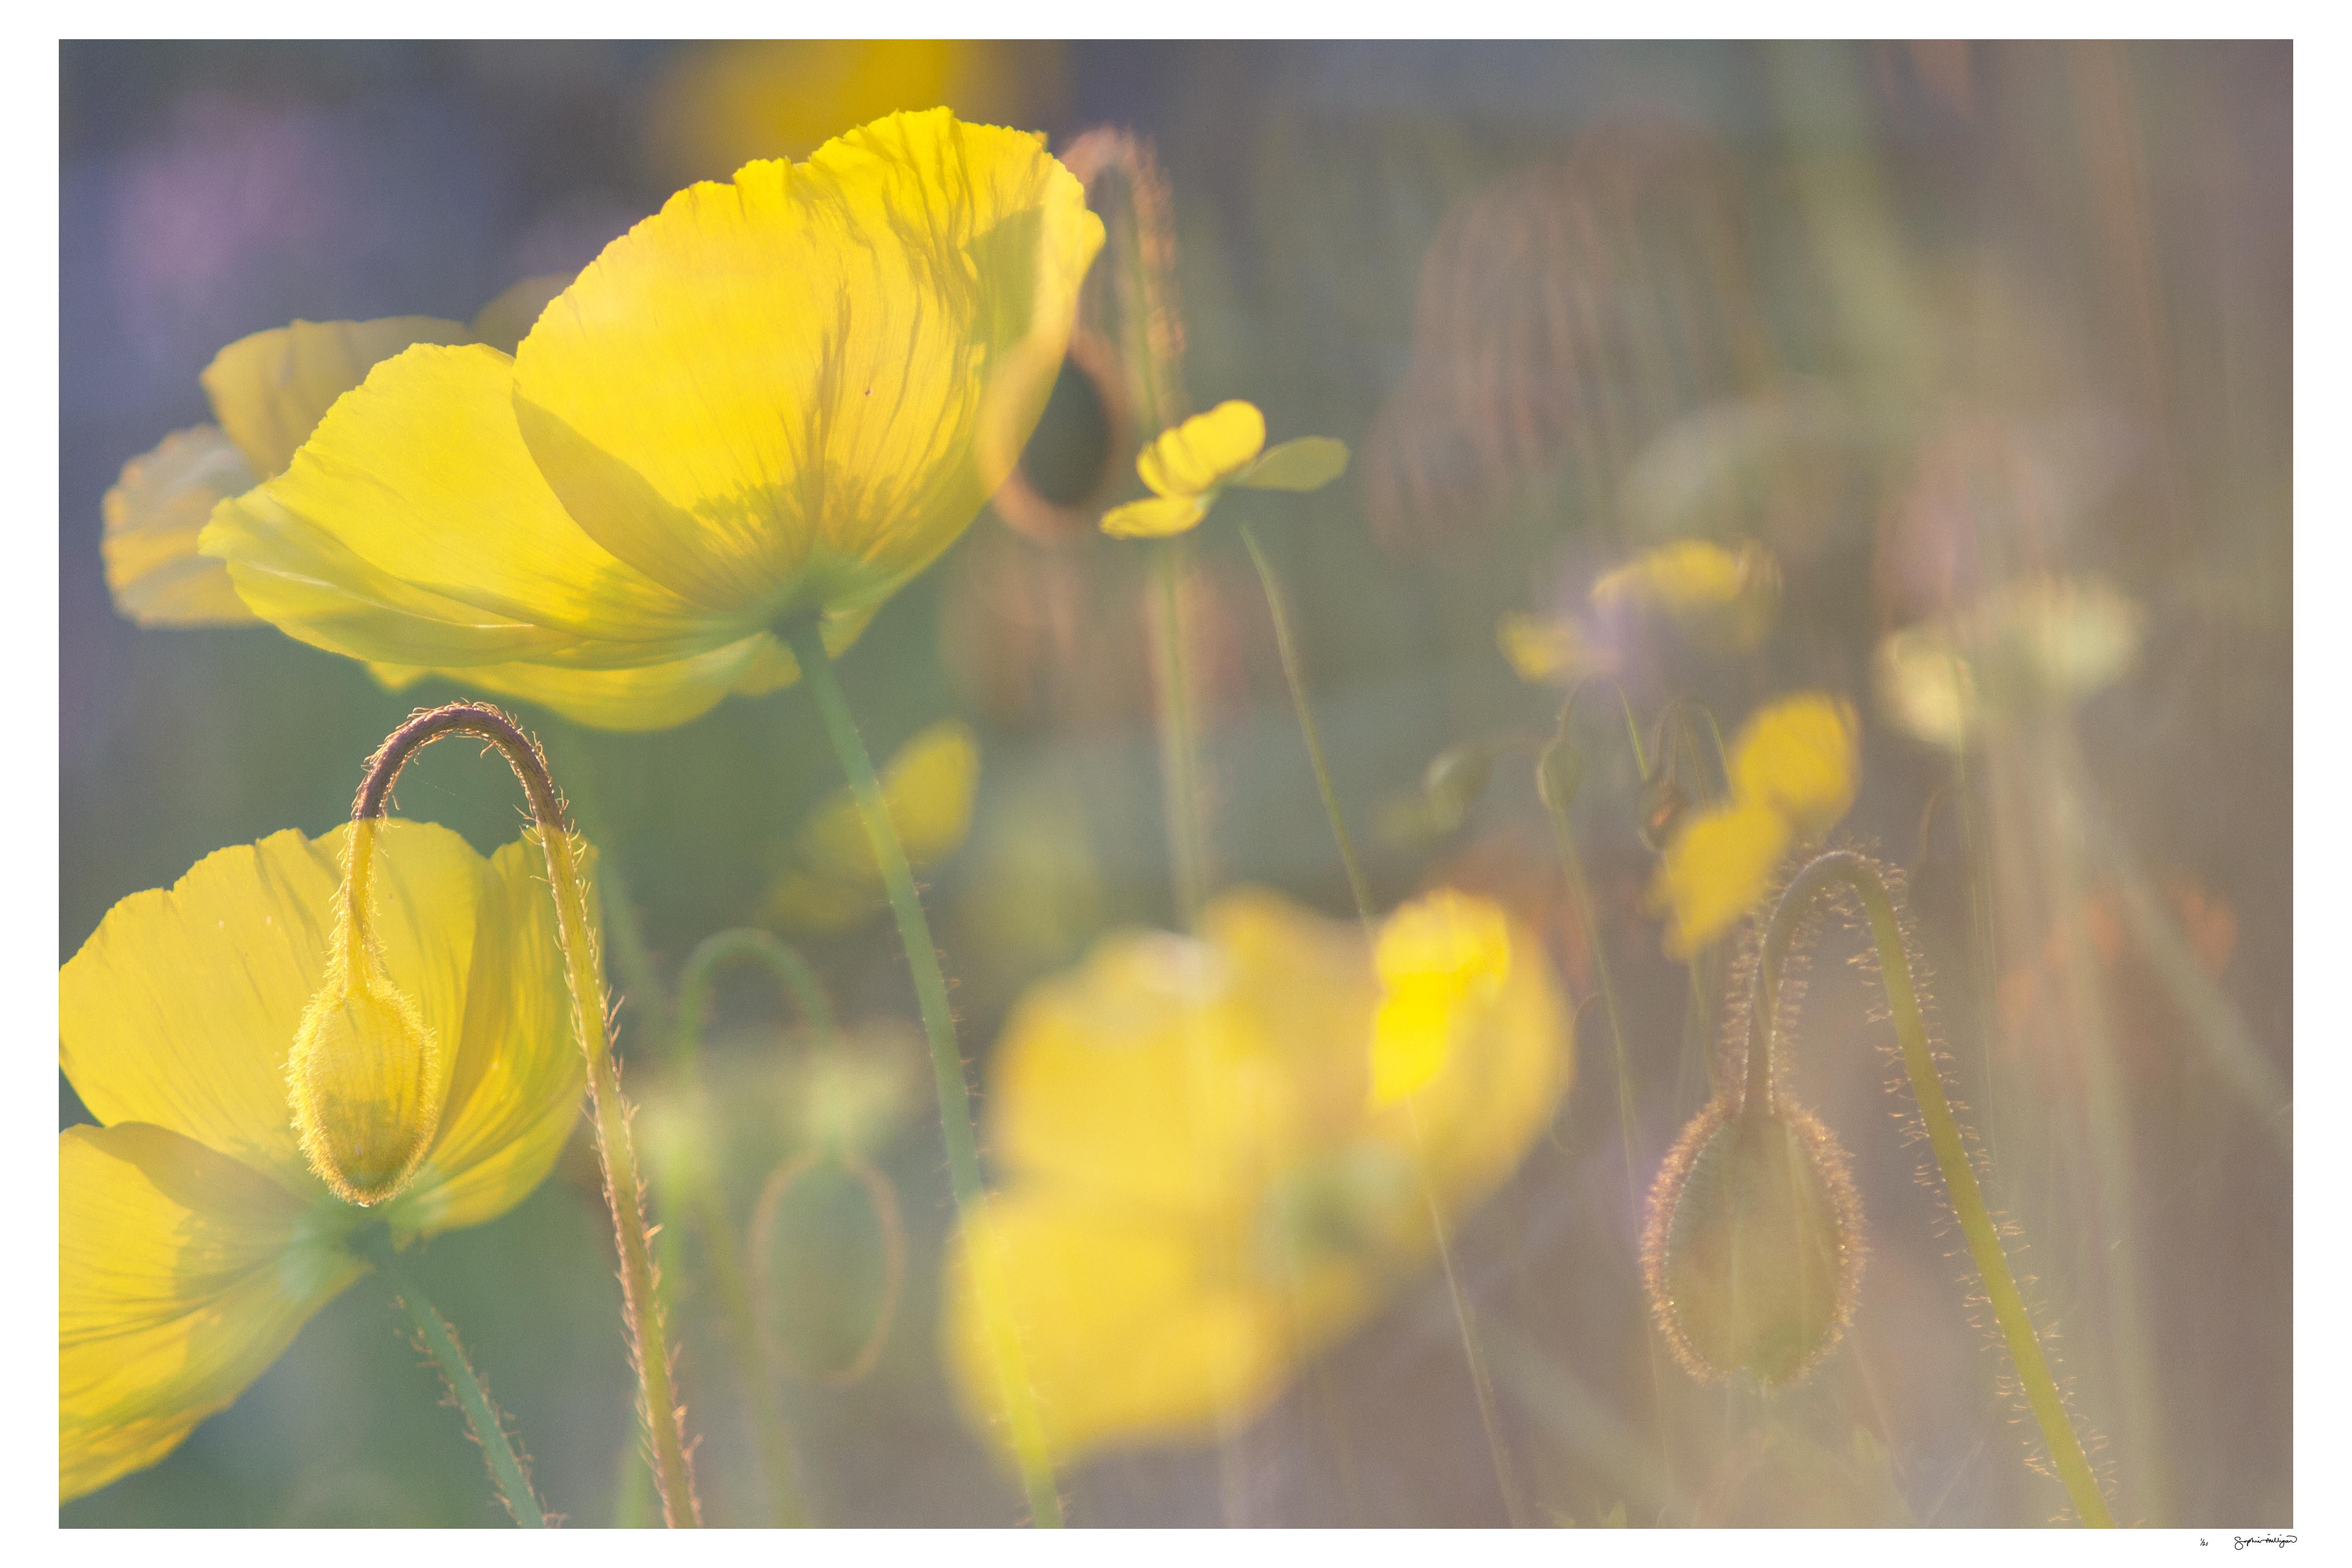 Sophia Milligan Landscape Photograph - 'Yellow Poppies' Limited Edition photo floral botanical yellow green 24 x 36"